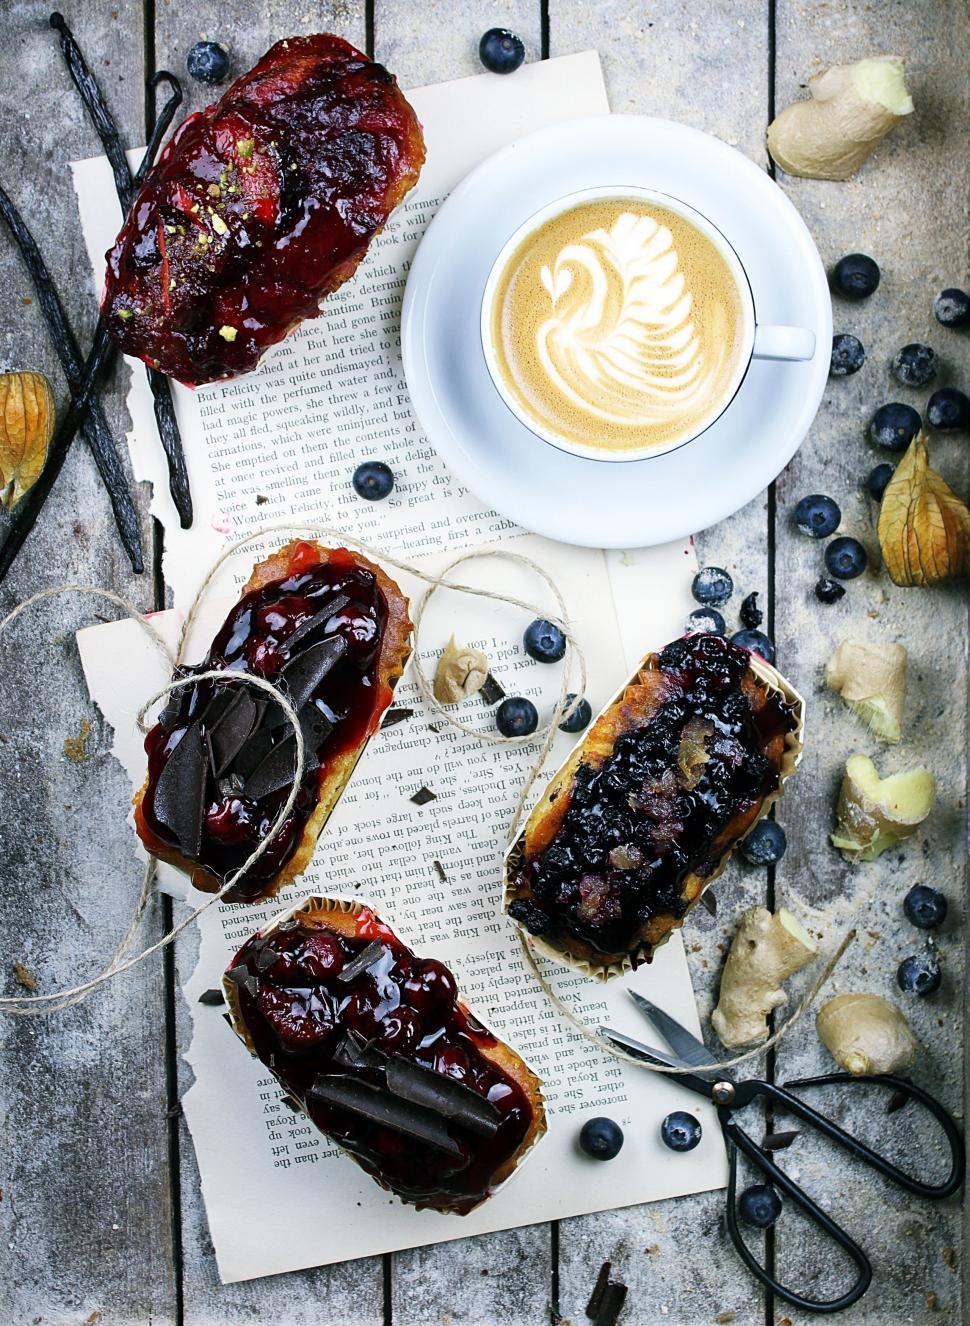 Free Image of Blueberries Pastries and Milk Coffee  